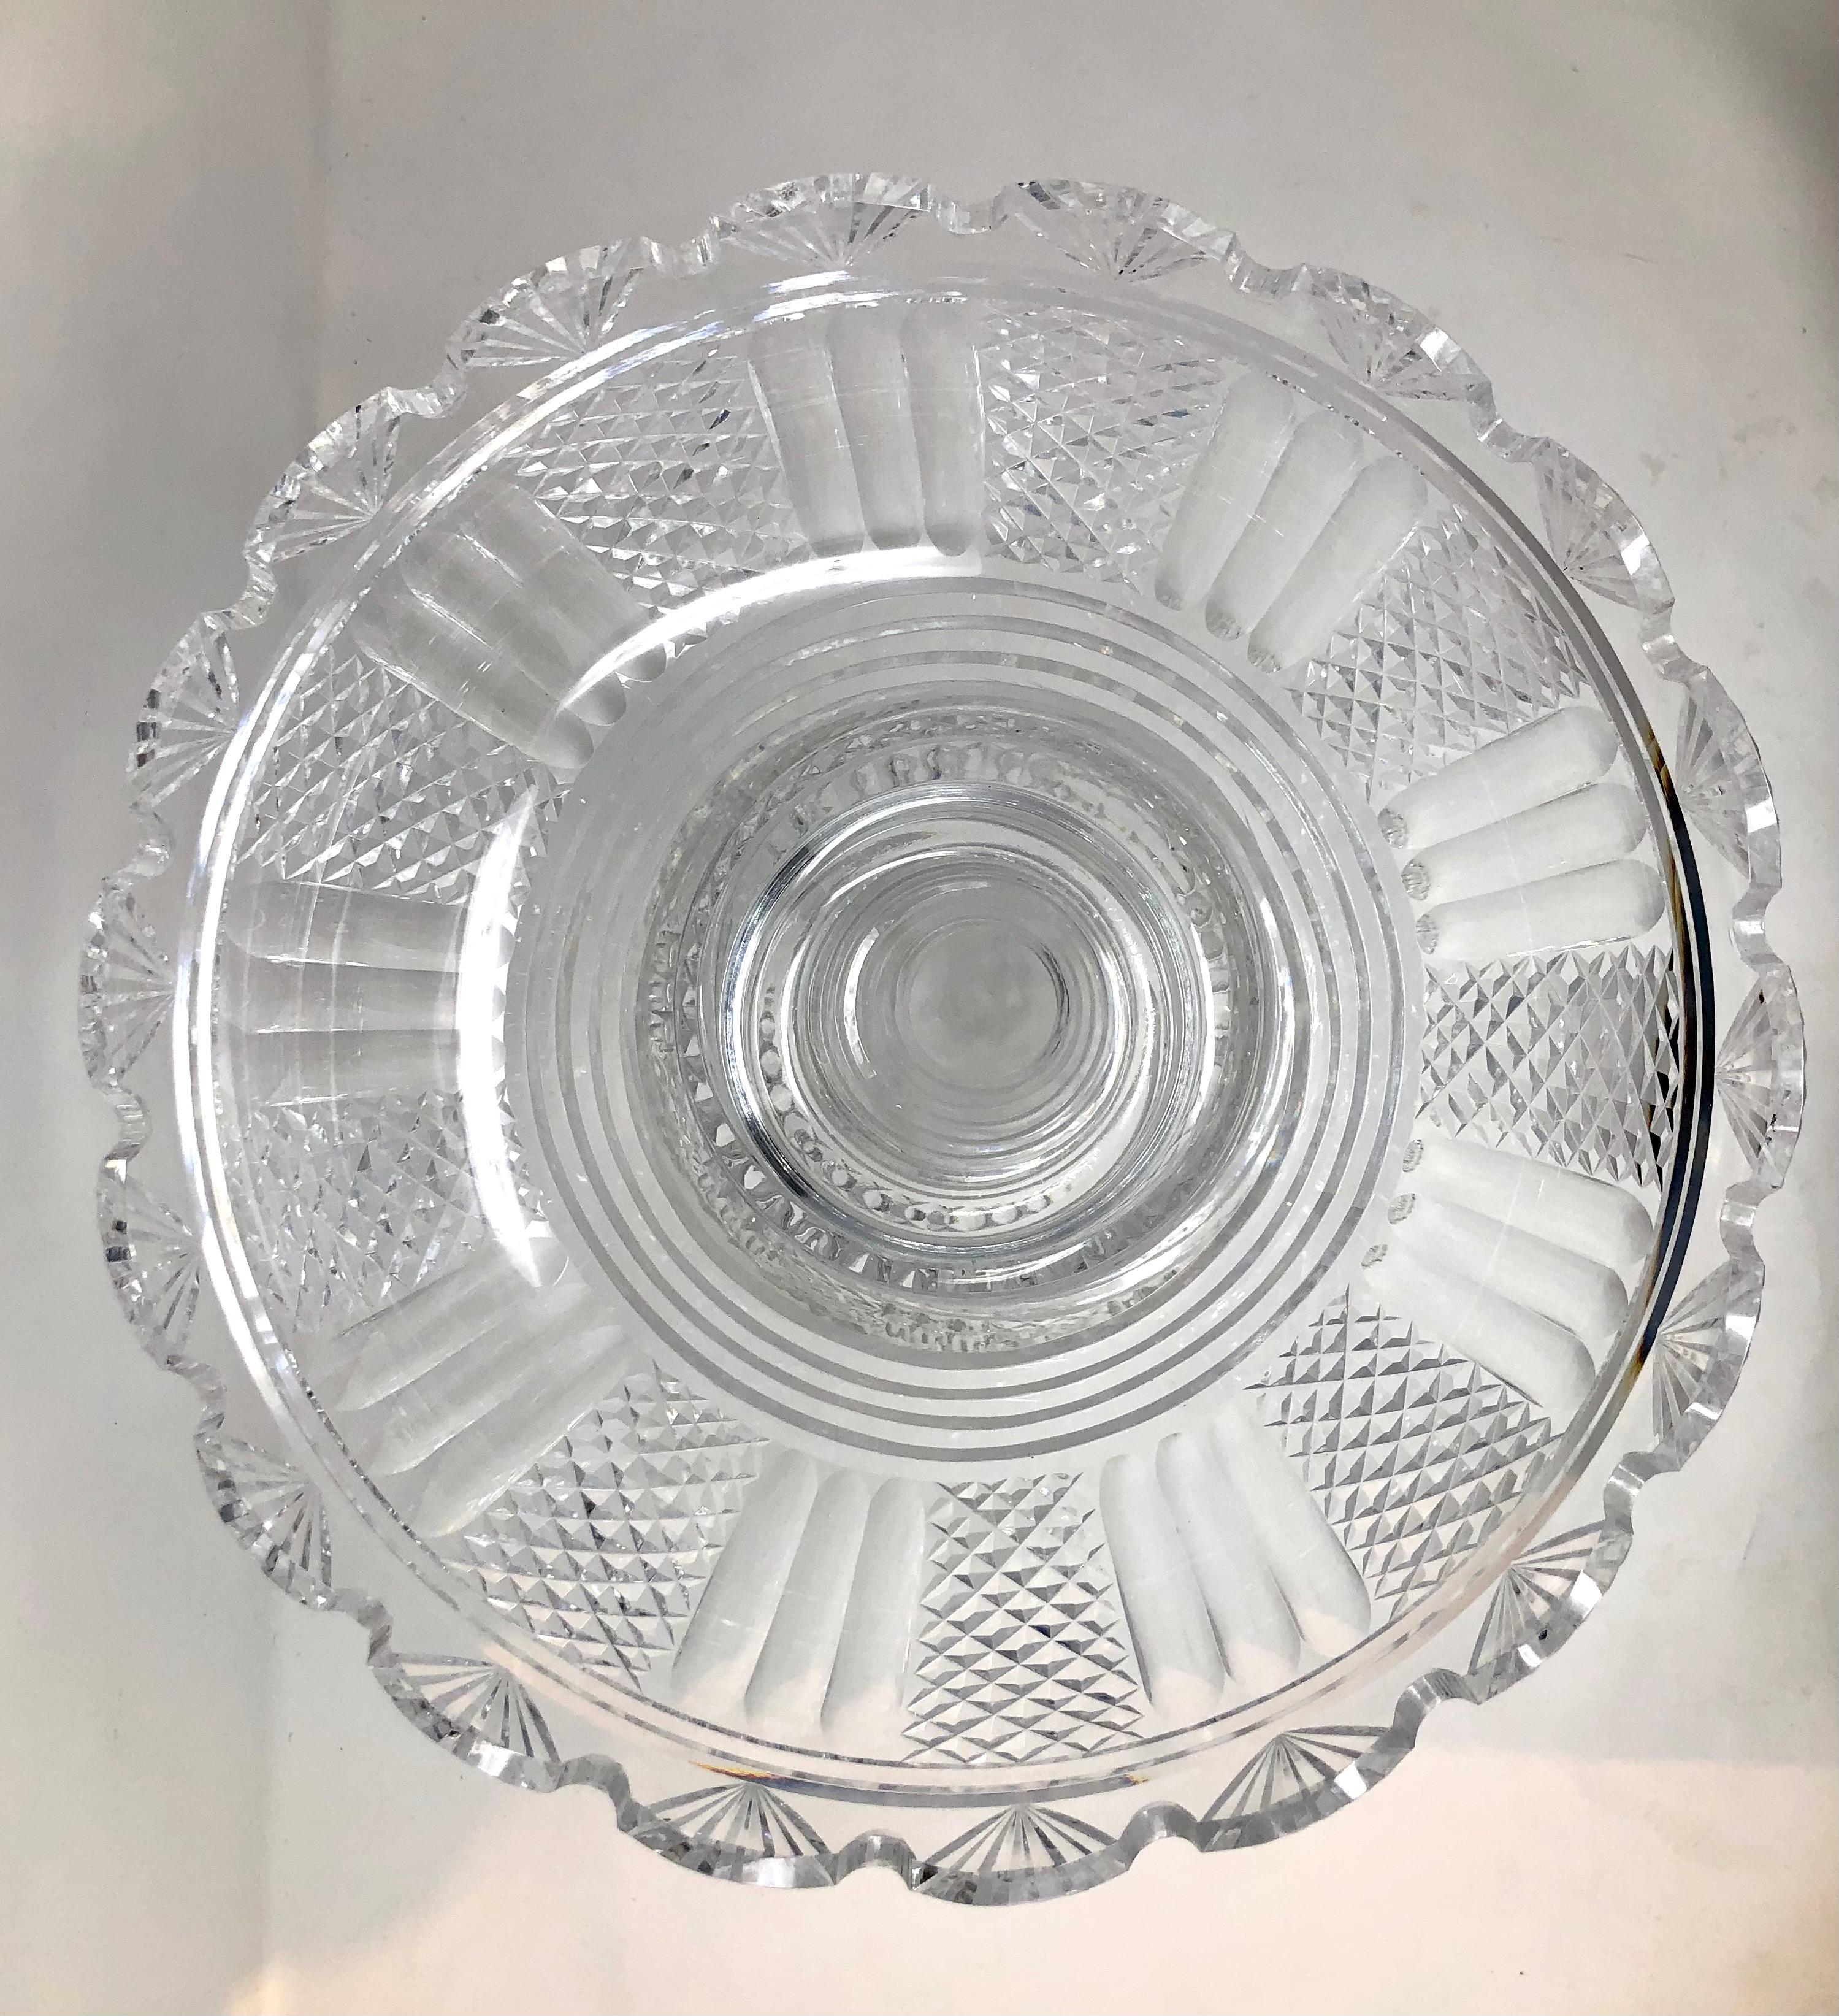 Antique zwaterford cut crystal punch bowl onStand, Circa 1920-1930.
Lovely cut crystal centerpiece, great for serving cocktails and punch, displaying flowers and fruit, or just entertaining in general!.